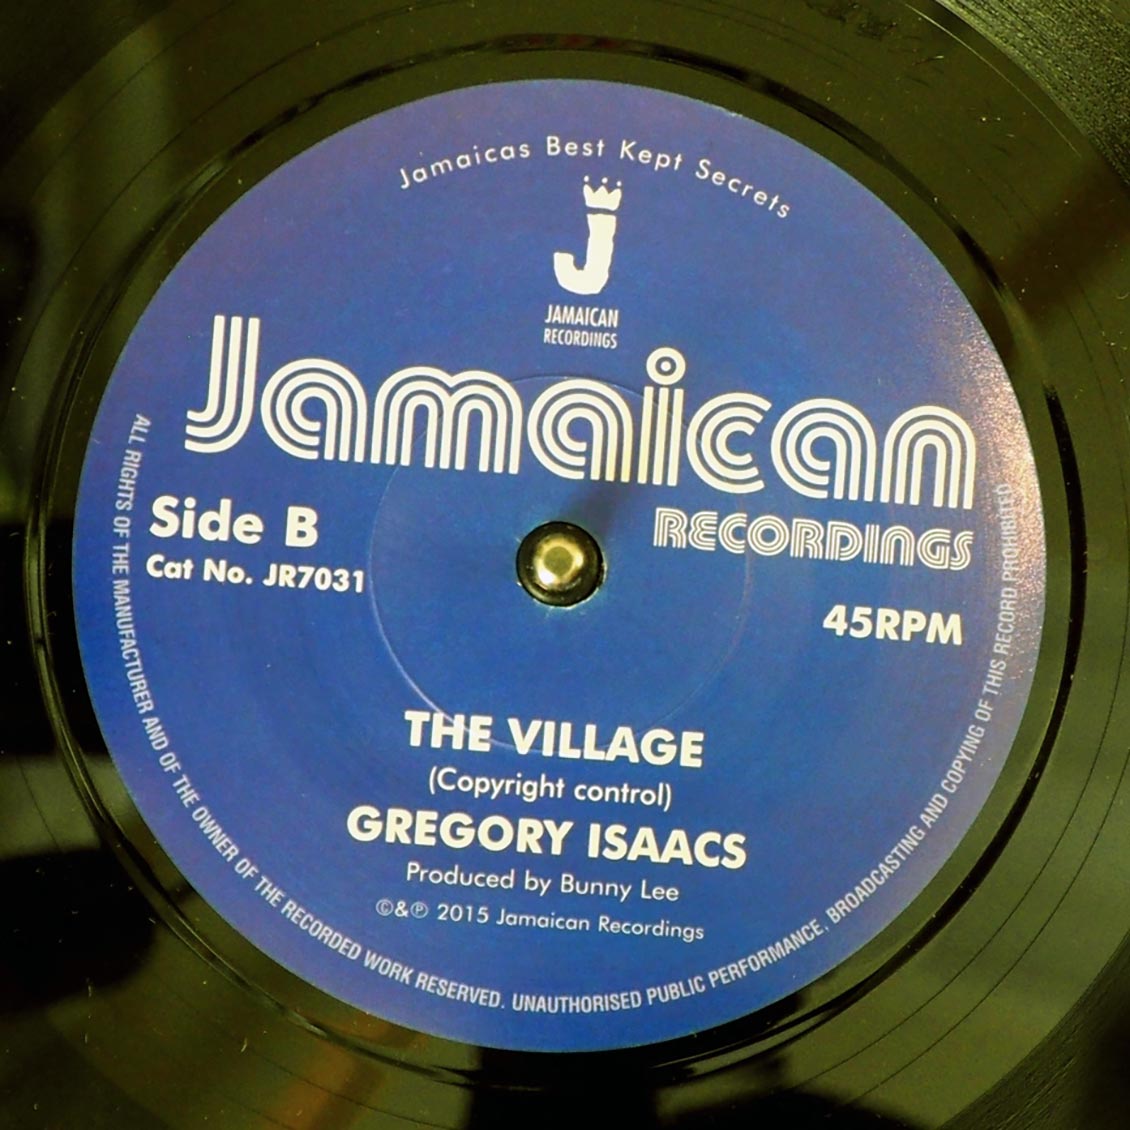 Gregory Isaacs - Don't Believe Him (Don't Believe In Him) / Gregory Isaacs - The Village